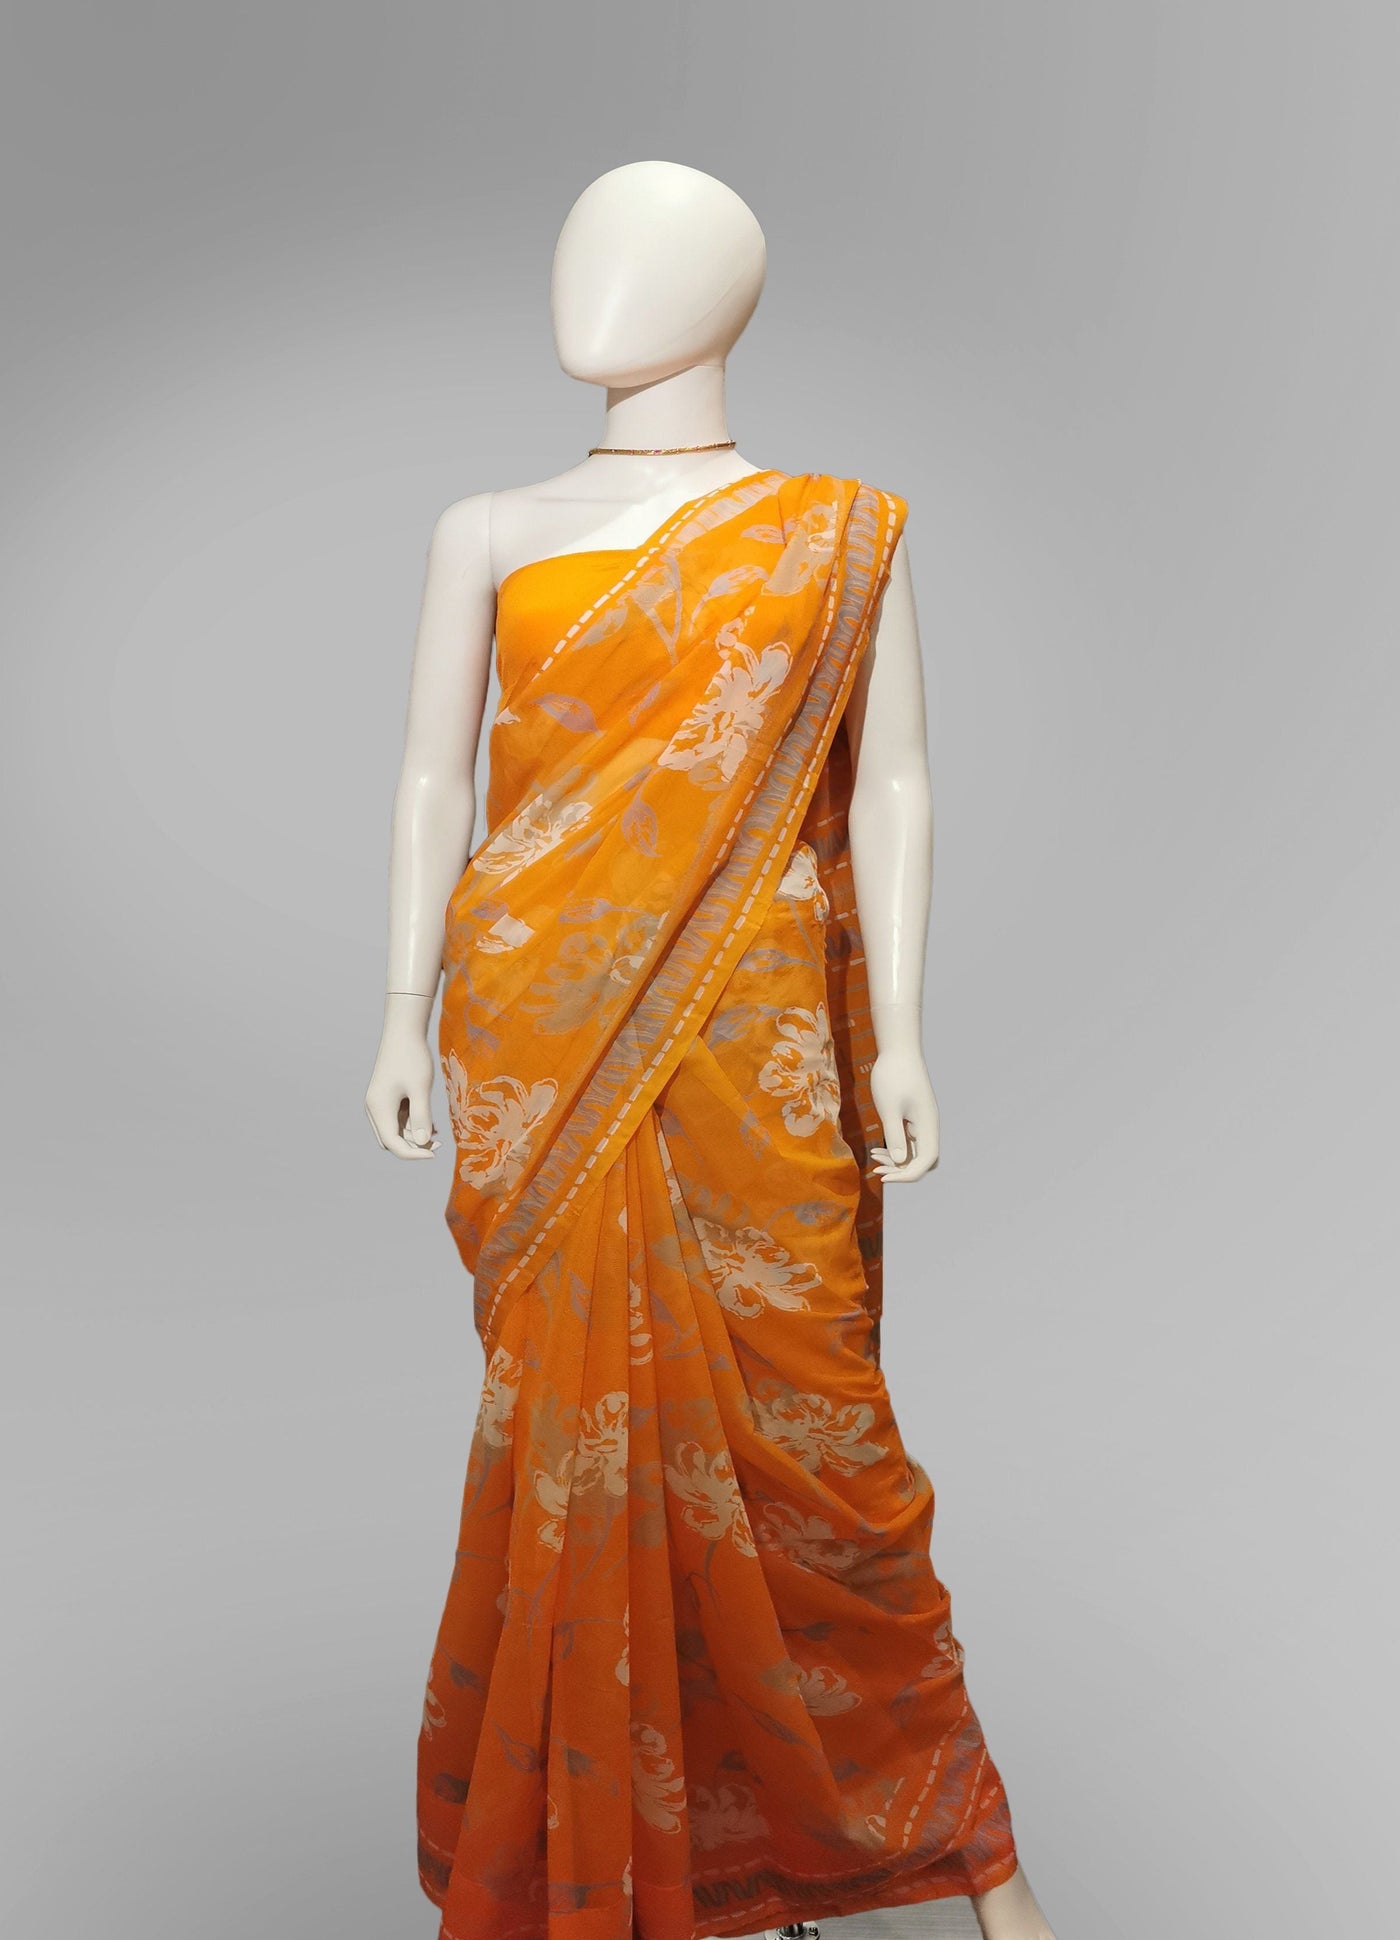 Saree in Orange Blend With Silver Floral Print Indian Clothing in Denver, CO, Aurora, CO, Boulder, CO, Fort Collins, CO, Colorado Springs, CO, Parker, CO, Highlands Ranch, CO, Cherry Creek, CO, Centennial, CO, and Longmont, CO. NATIONWIDE SHIPPING USA- India Fashion X